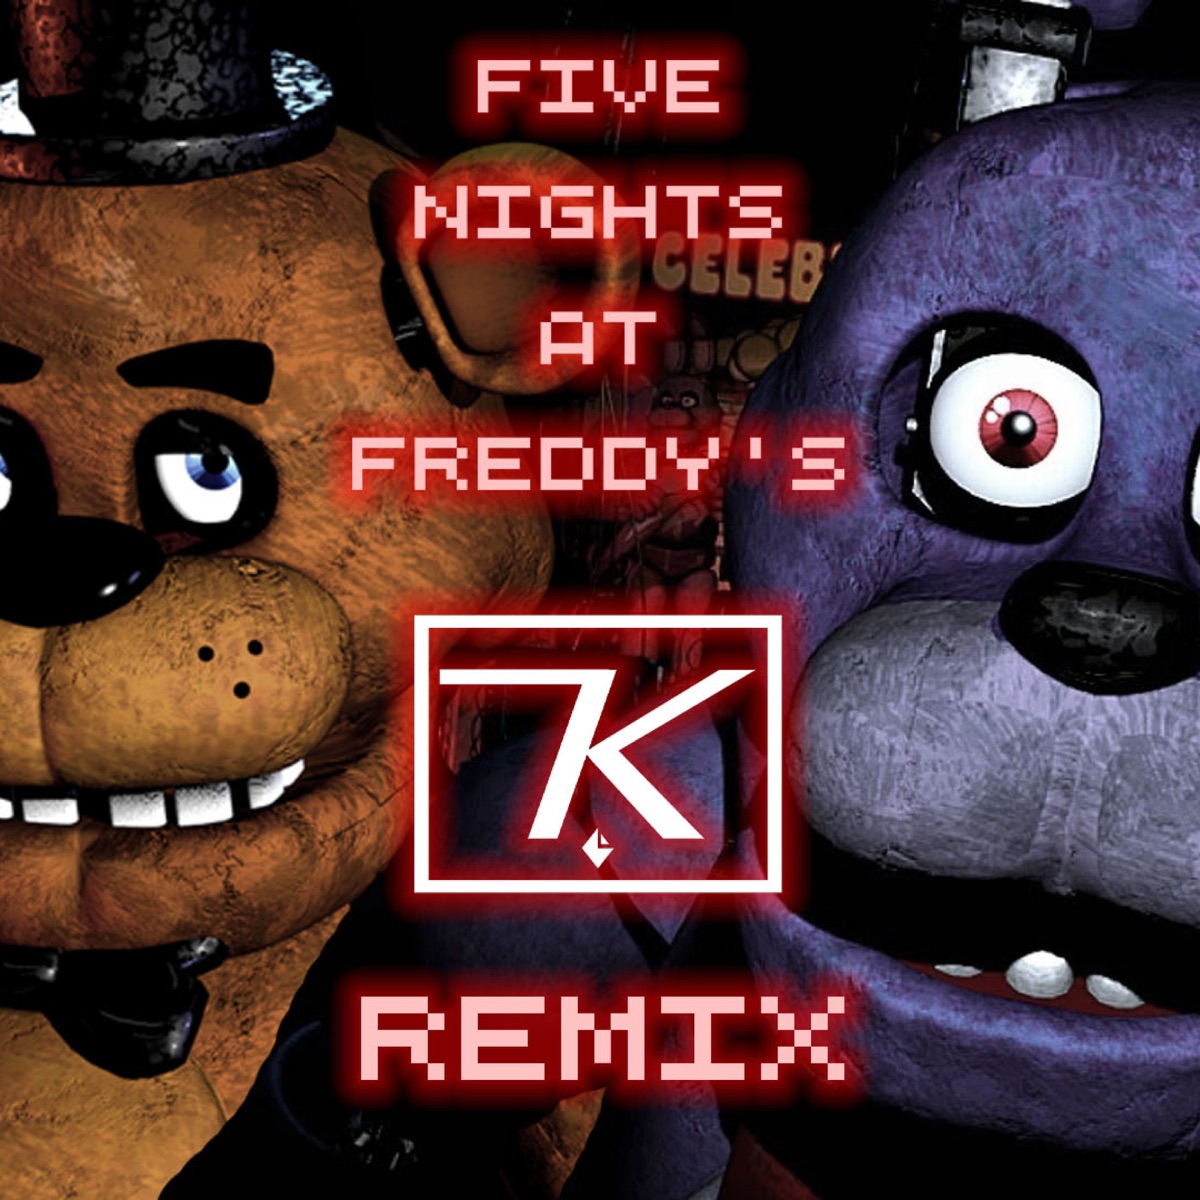 Five Nights at Freddy's 1 Song Remix